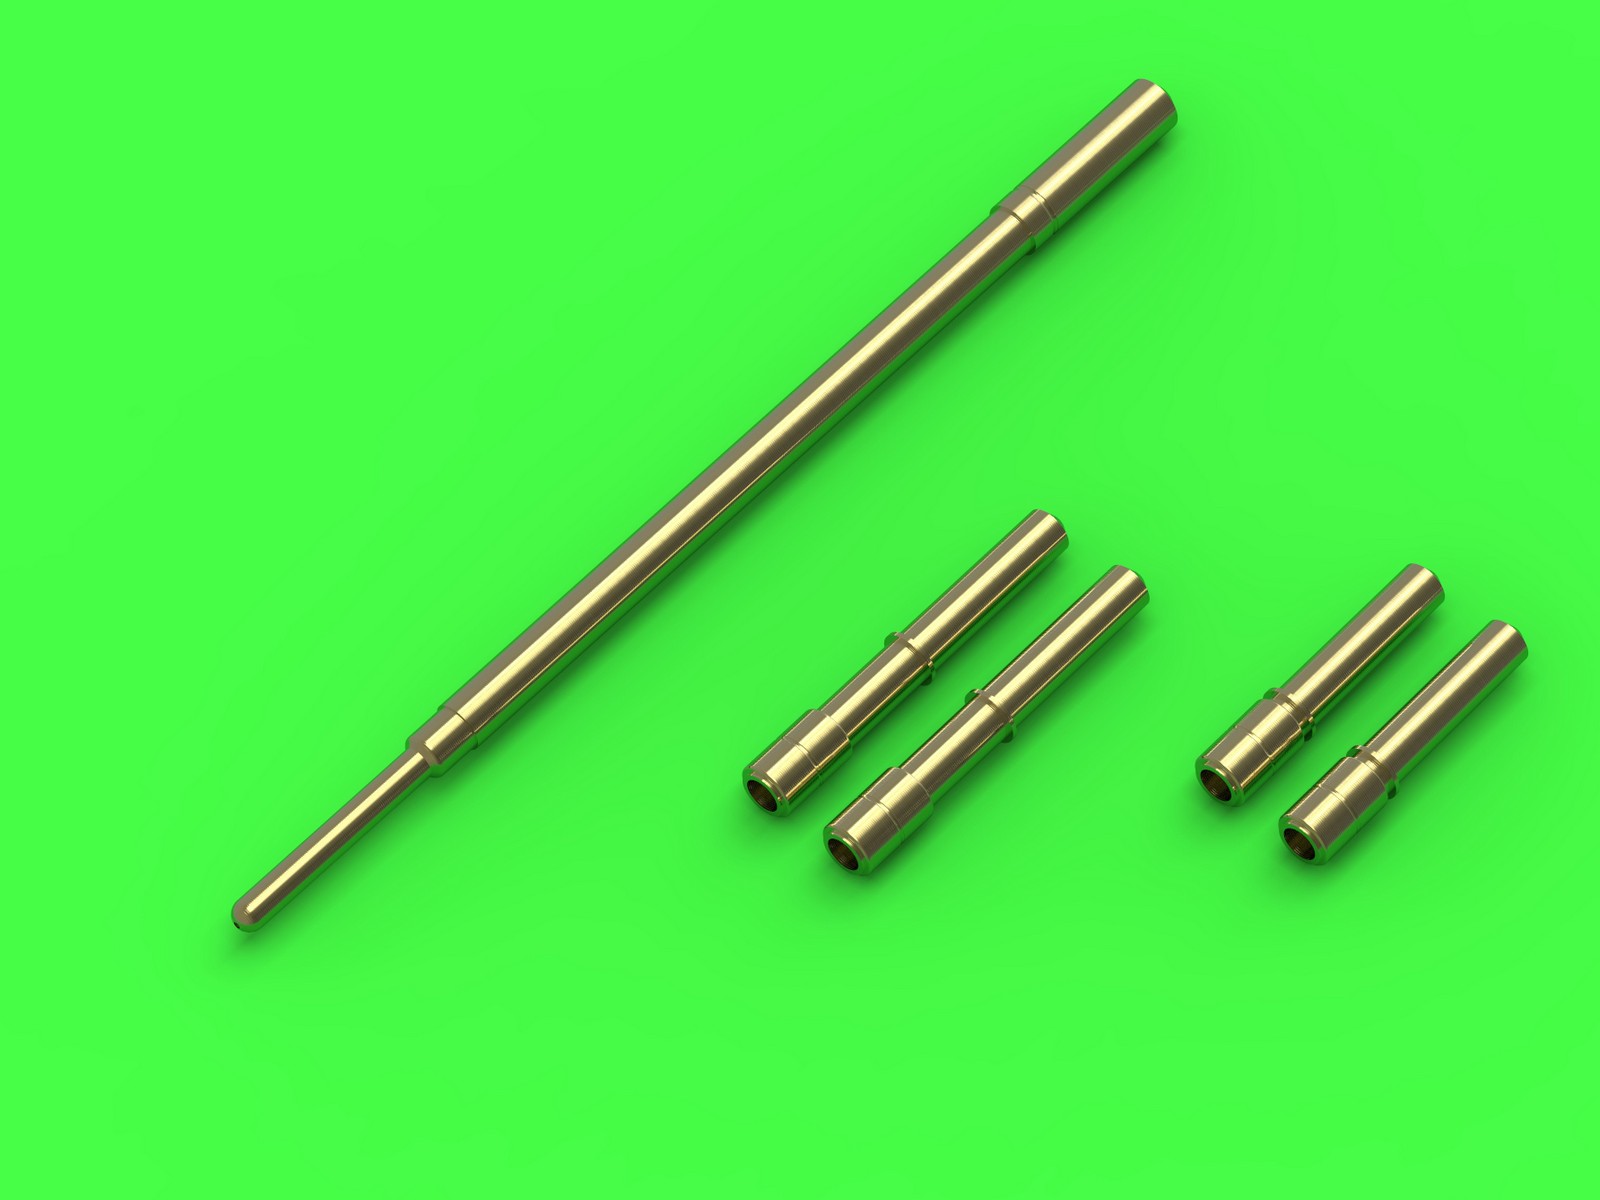 Aircraft detailing sets (brass) 1/32 Hawker Tempest Mk.II/Mk.V/Mk.VI and Hawker Fury/Sea Fury - Hispano Mk.V cannon barrel tips and Pitot Tube (designed to be used with Revell and Special Hobby kits) 